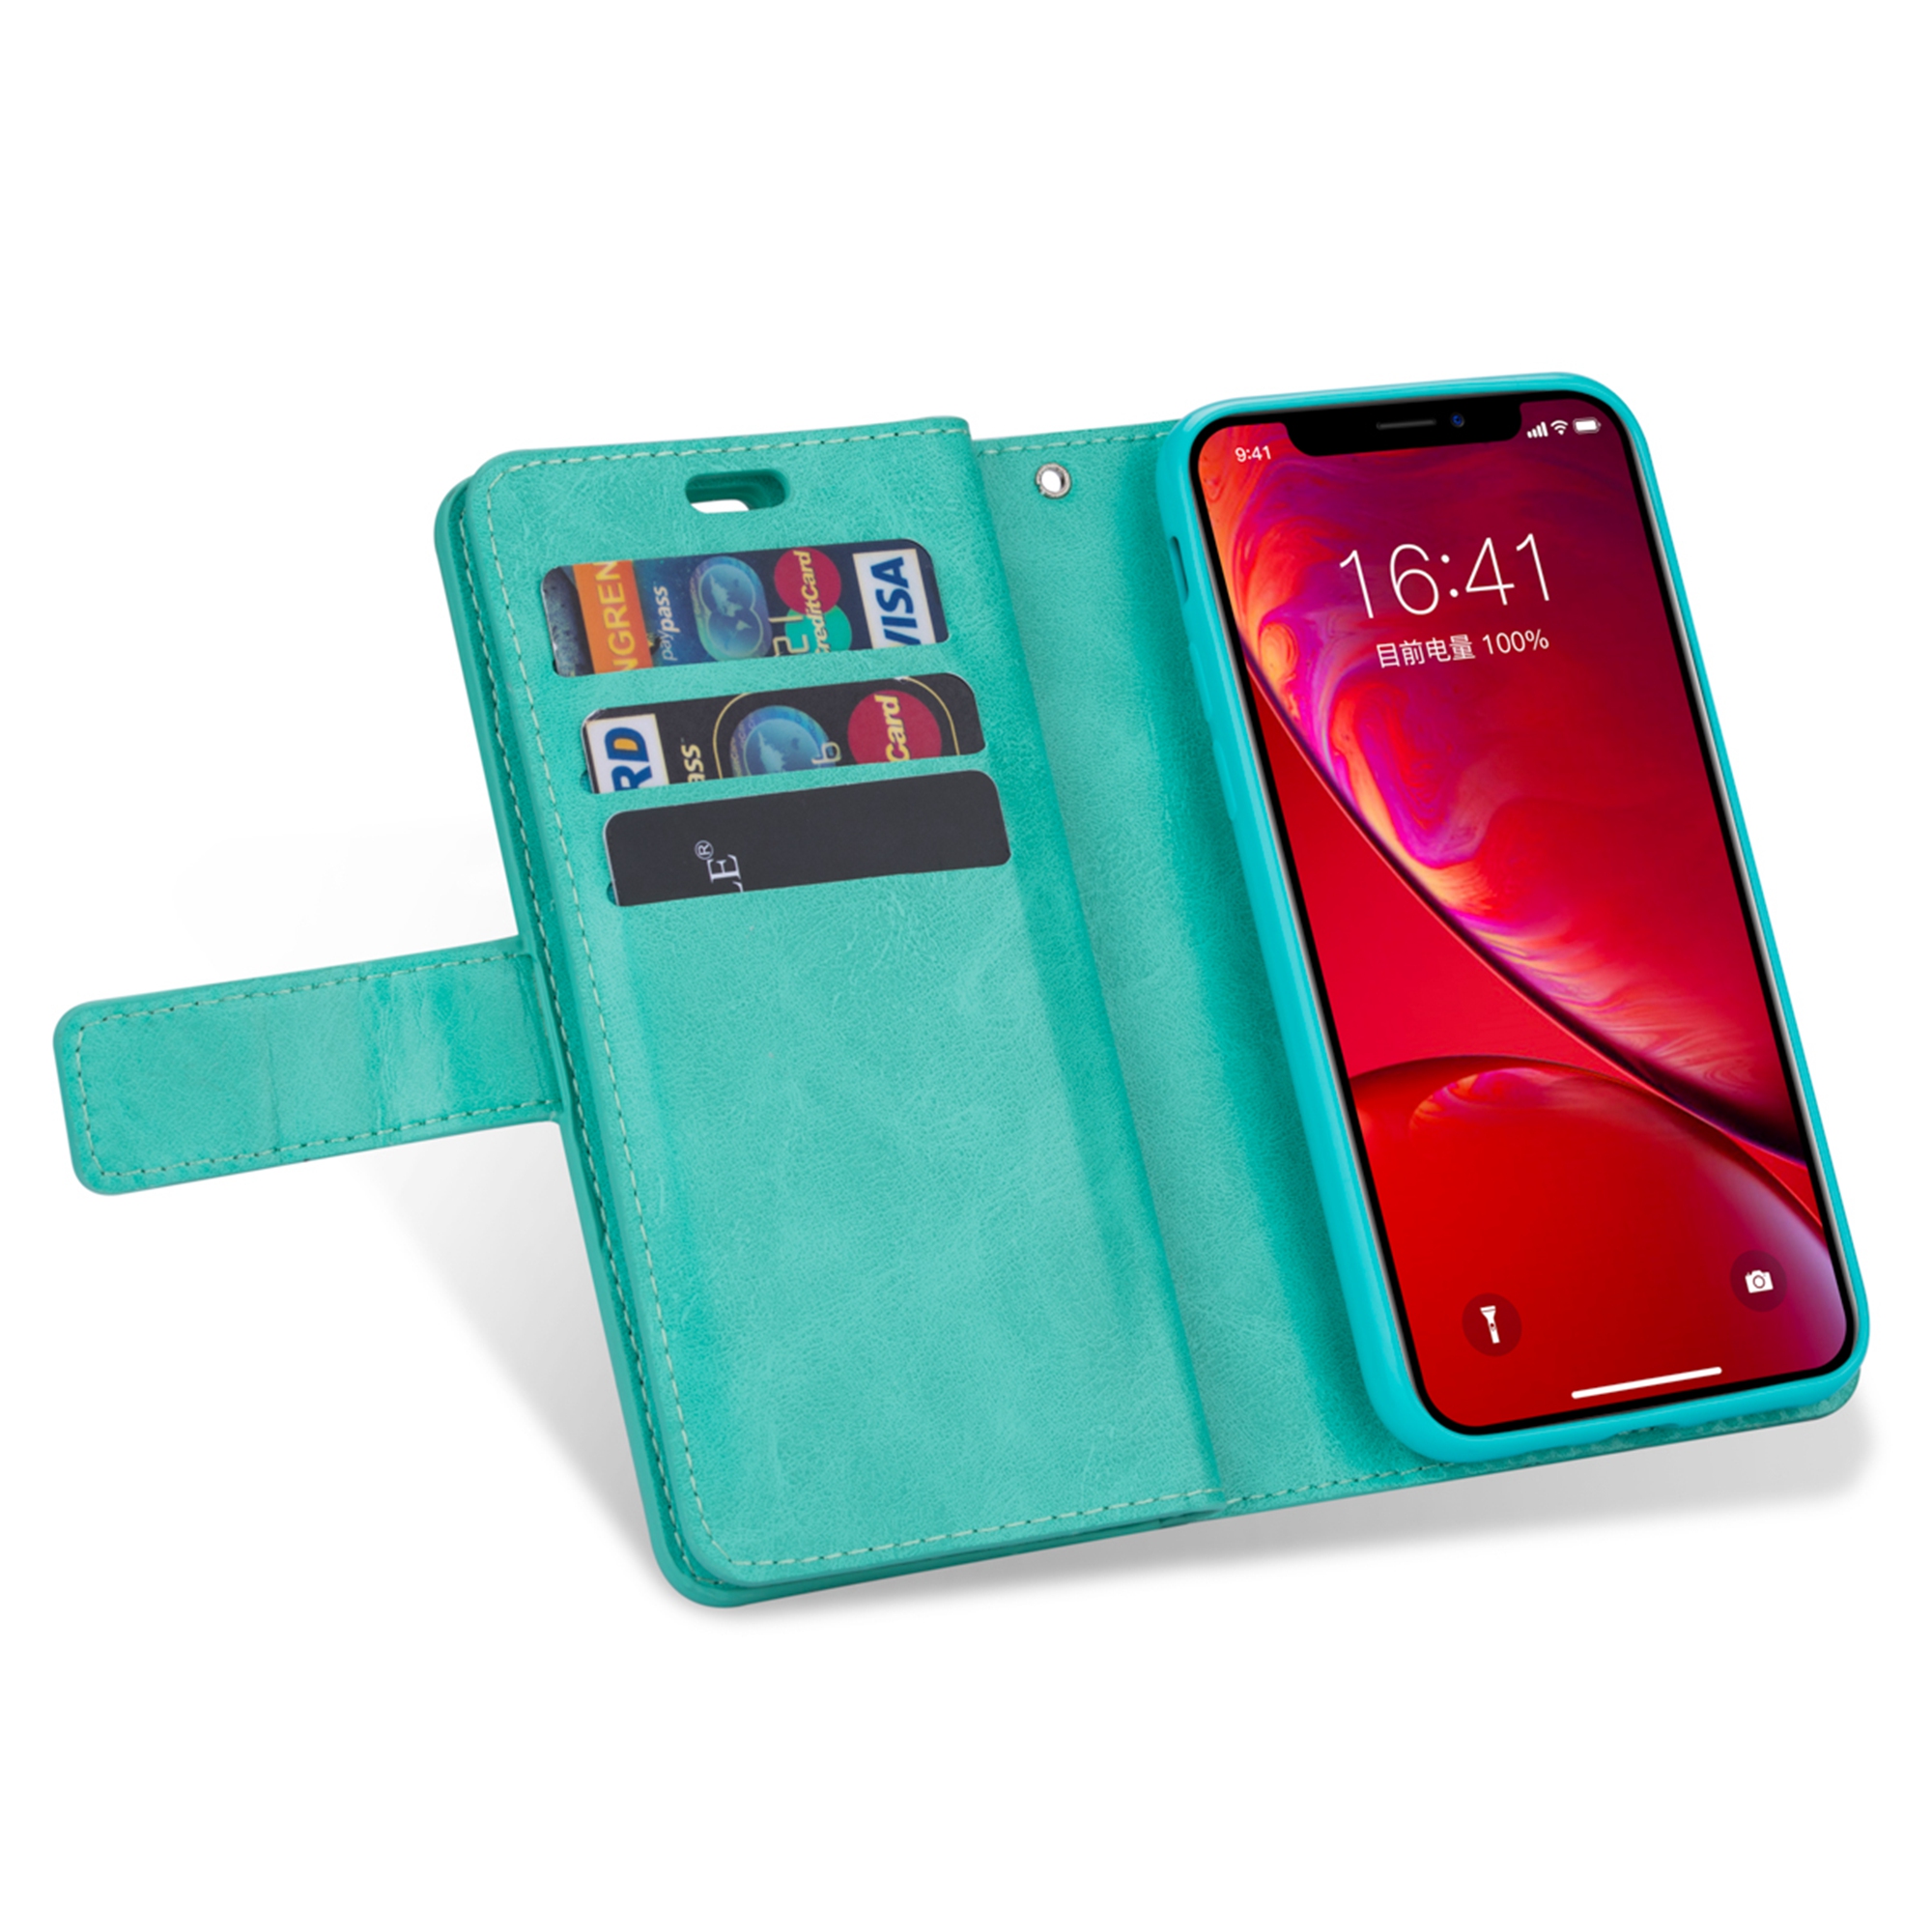 iPhone 11 Pro Max 6.5 inch Wallet Case, Dteck 9 Card Slots Premium Leather Zipper Purse case Flip Kickstand Folio Magnetic with Wrist Strap Credit Cash Cover For Apple iPhone 11 Pro Max, Mint - image 5 of 7